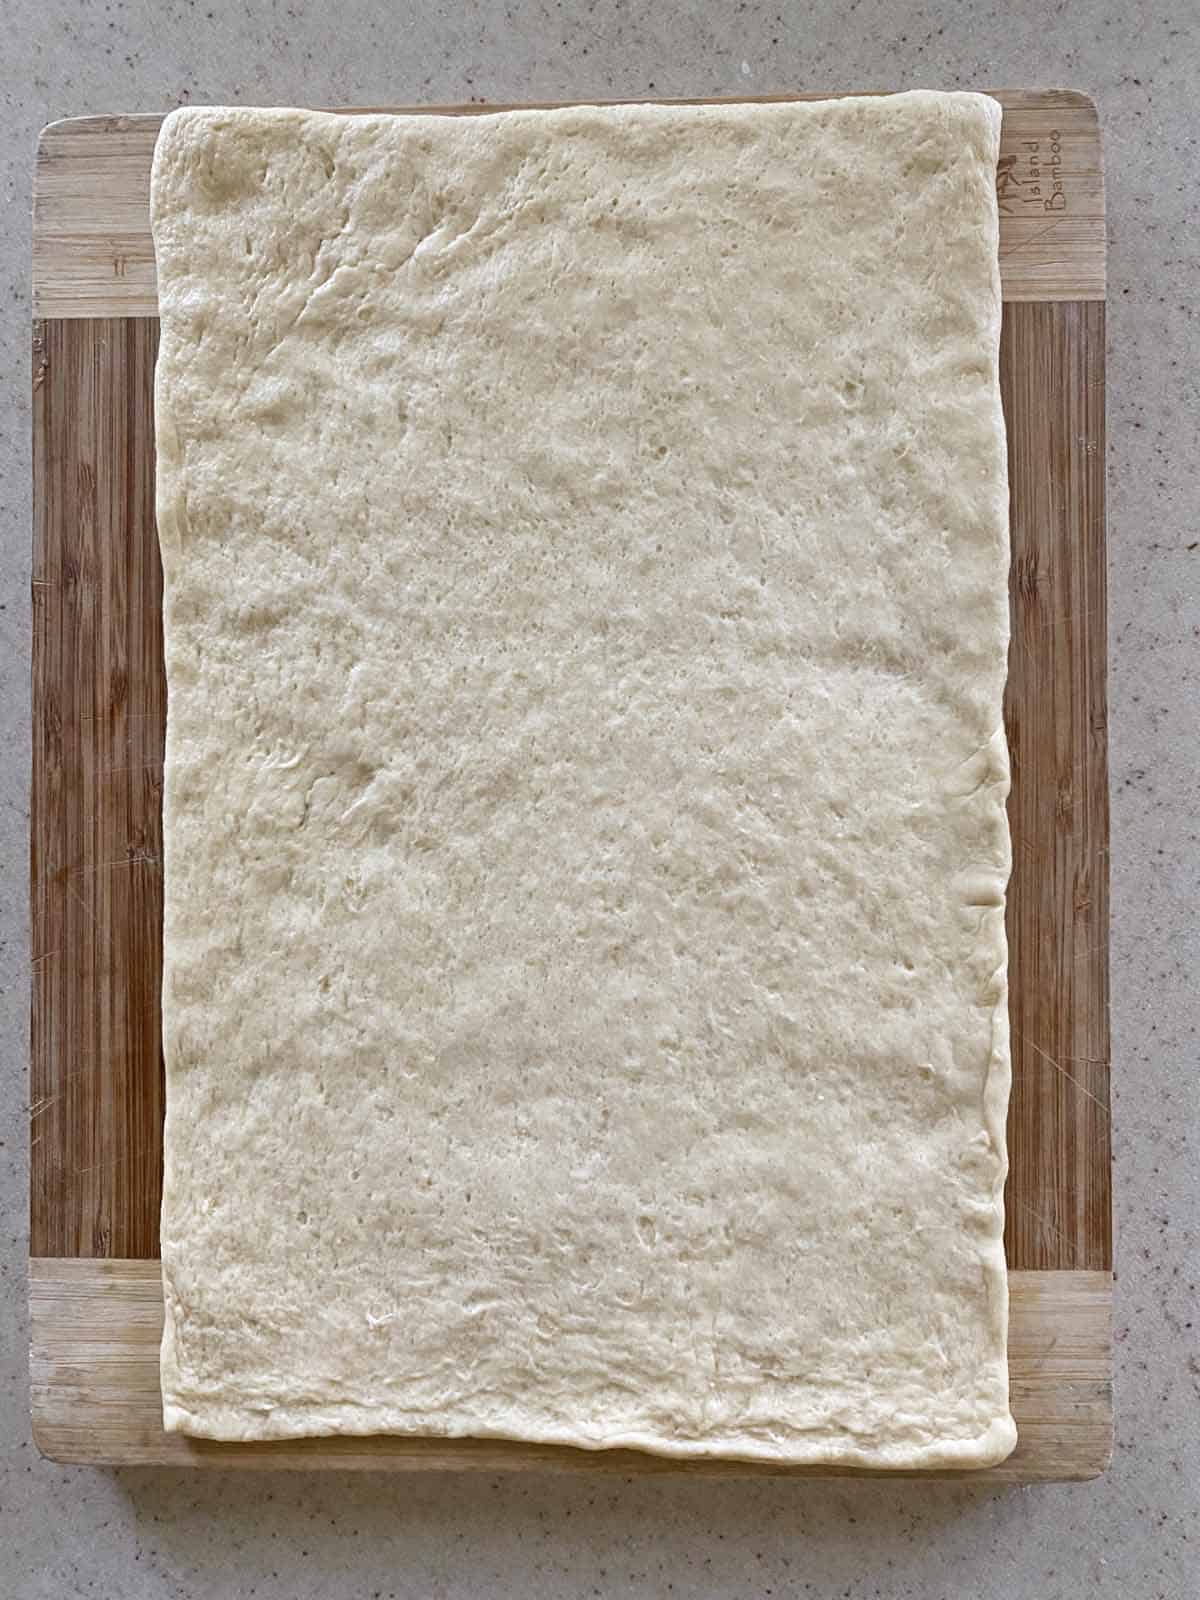 Crescent dough from a tube rolled out and patted on a bamboo cutting board.